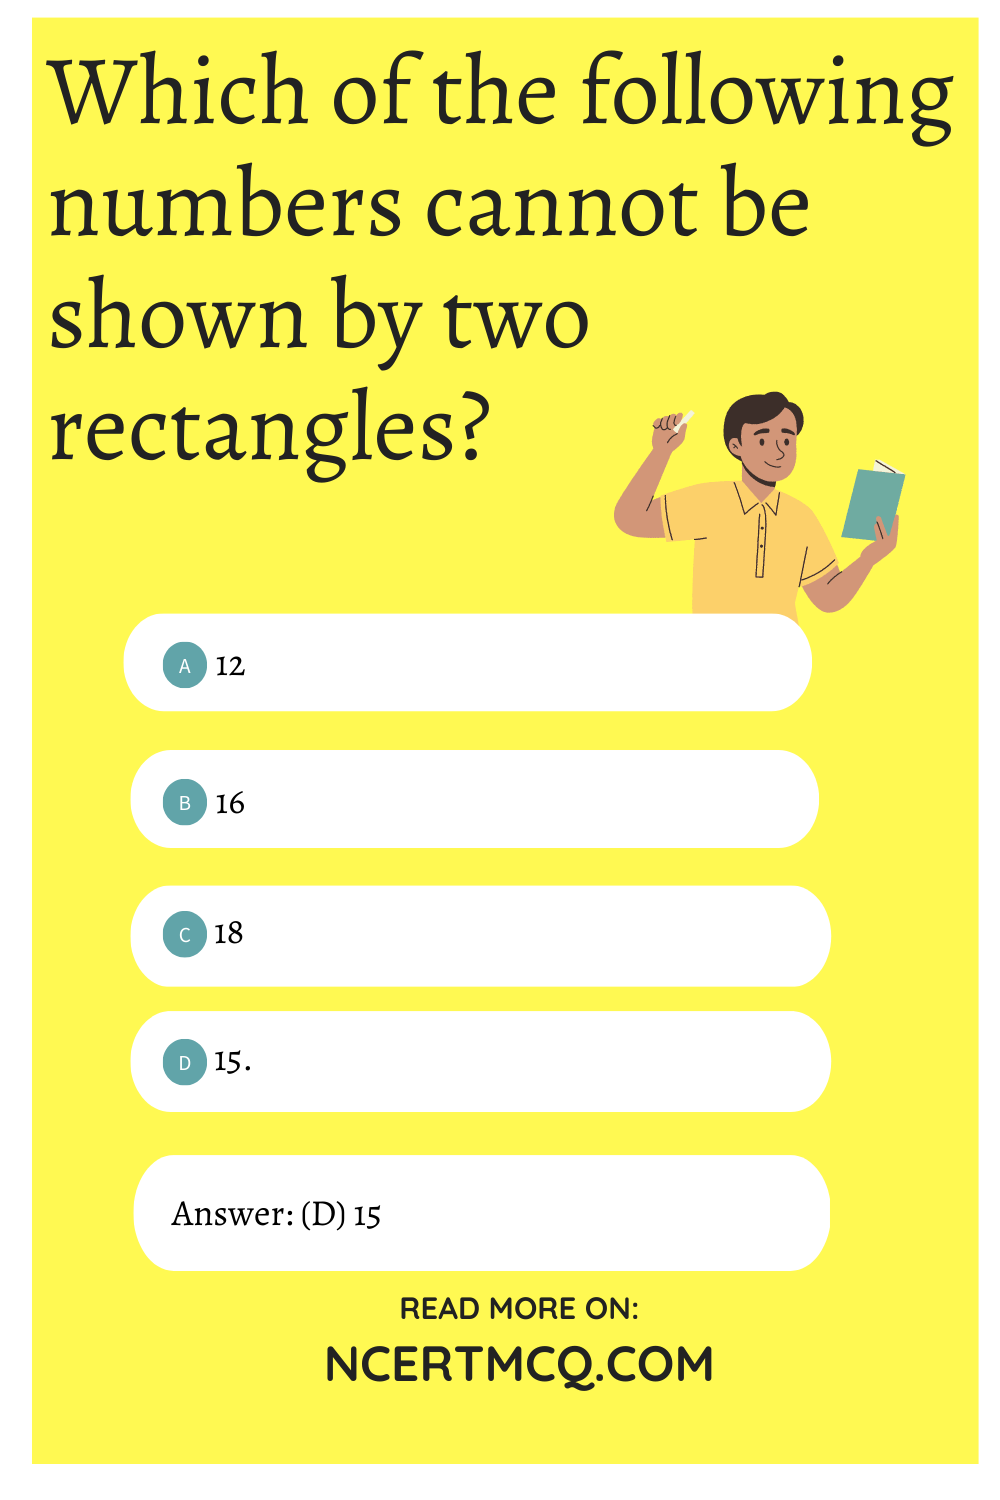 Which of the following numbers cannot be shown by two rectangles?